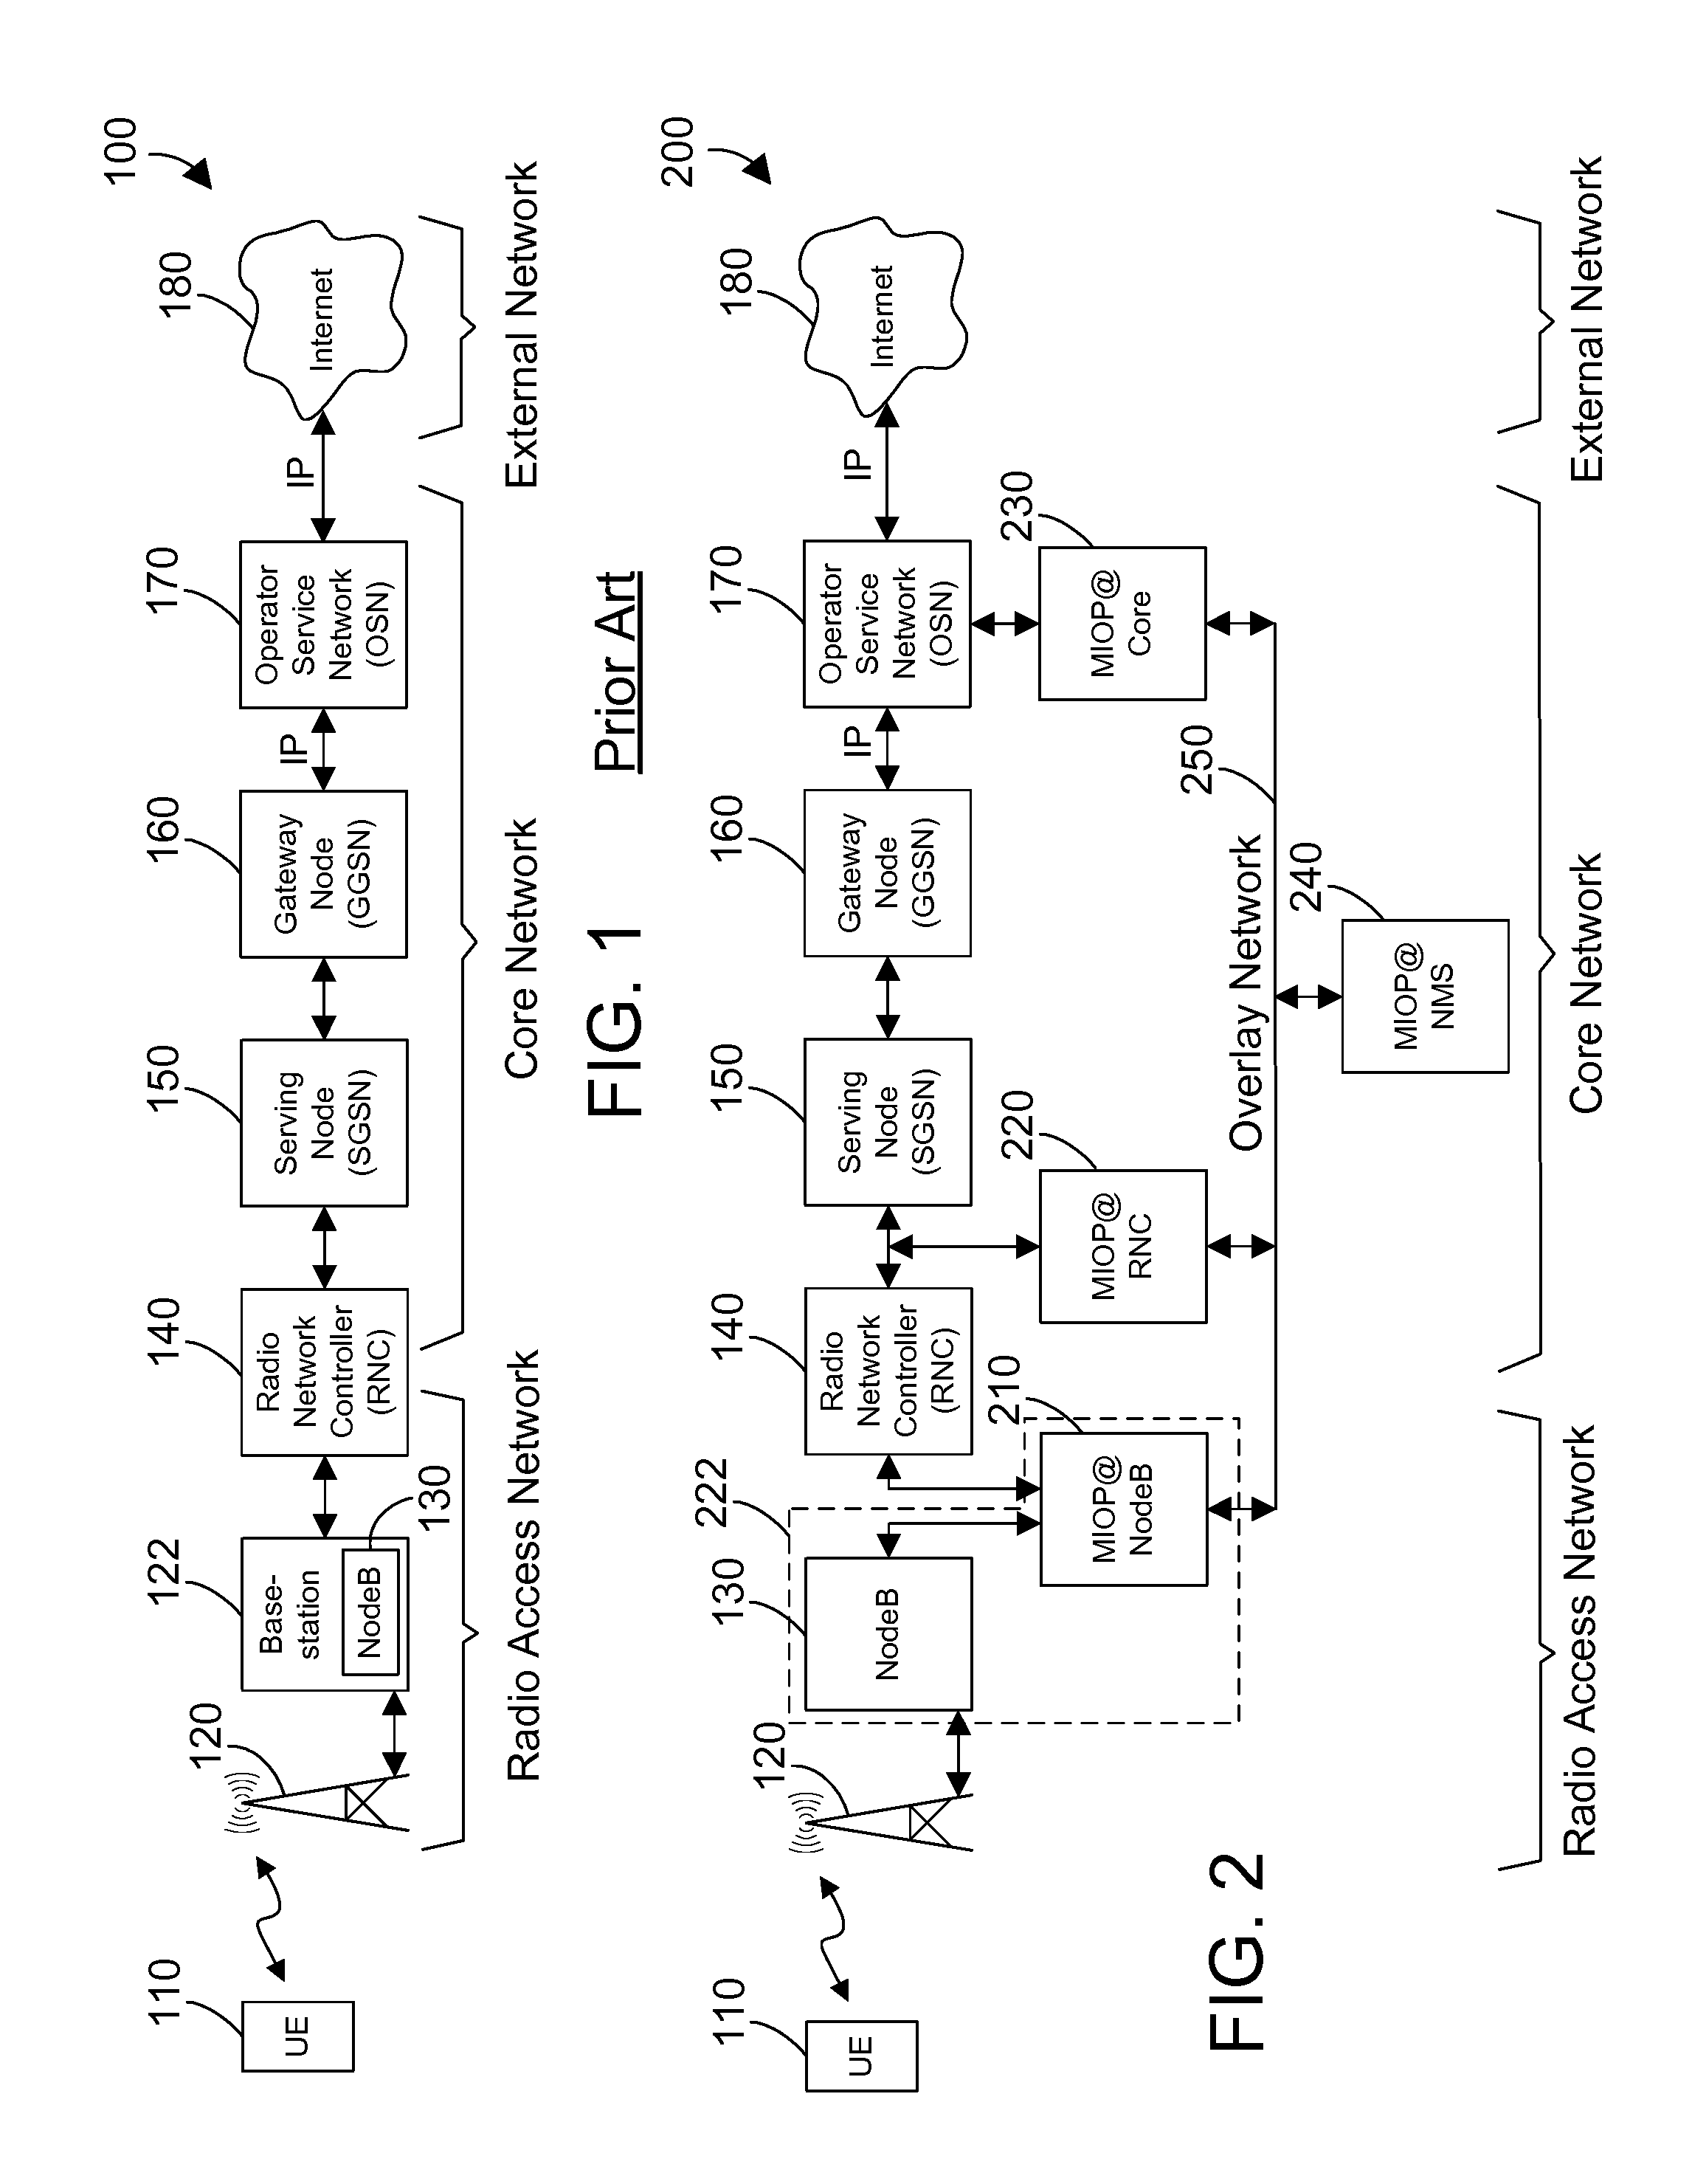 Autonomic error recovery for a data breakout appliance at the edge of a mobile data network